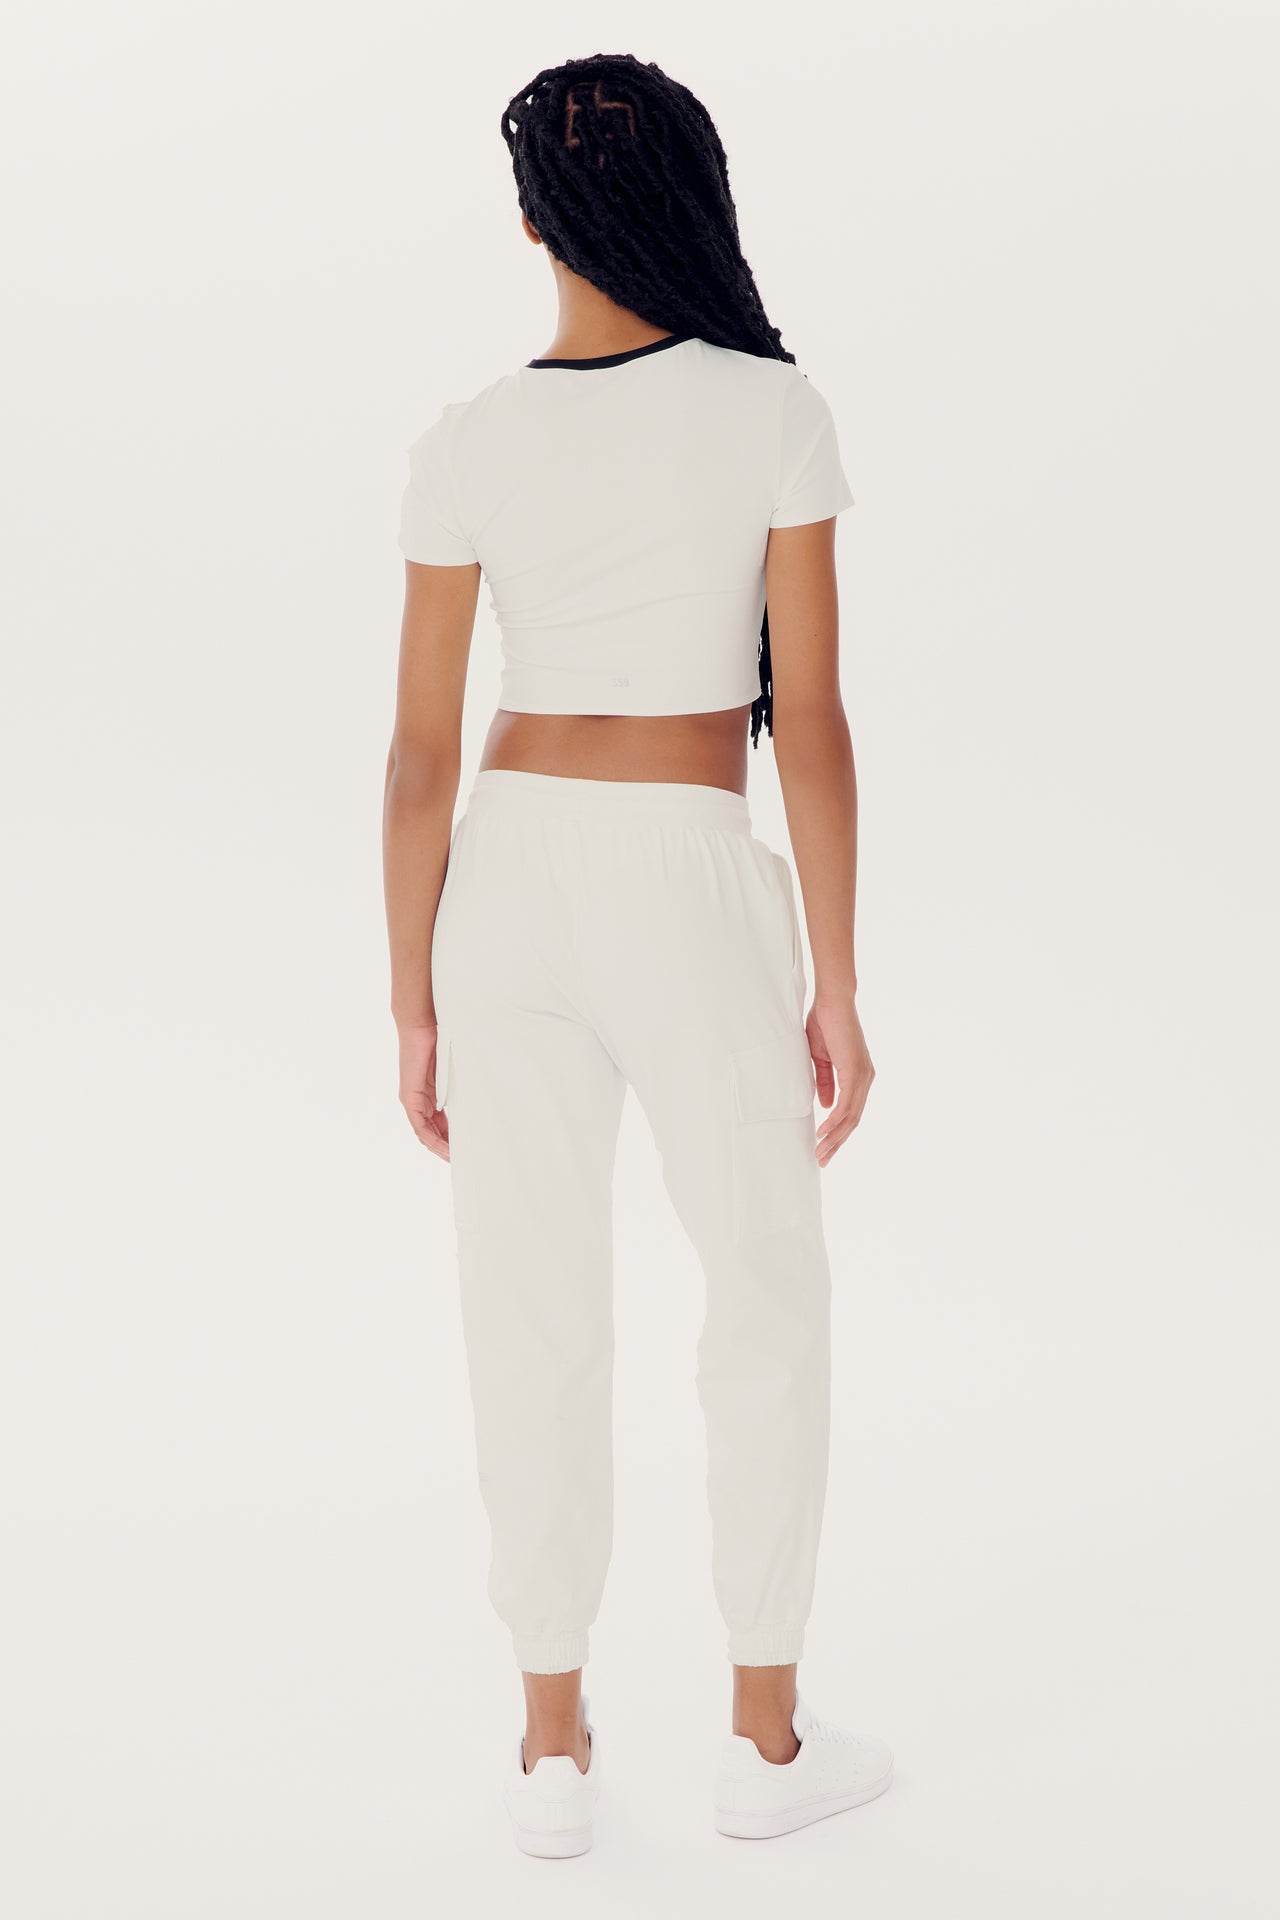 A person with long braided hair stands facing away from the camera, wearing a short-sleeved crop top and relaxed fit SPLITS59 Supplex Cargo Pant - White in mid-weight fabric, all paired with white sneakers.